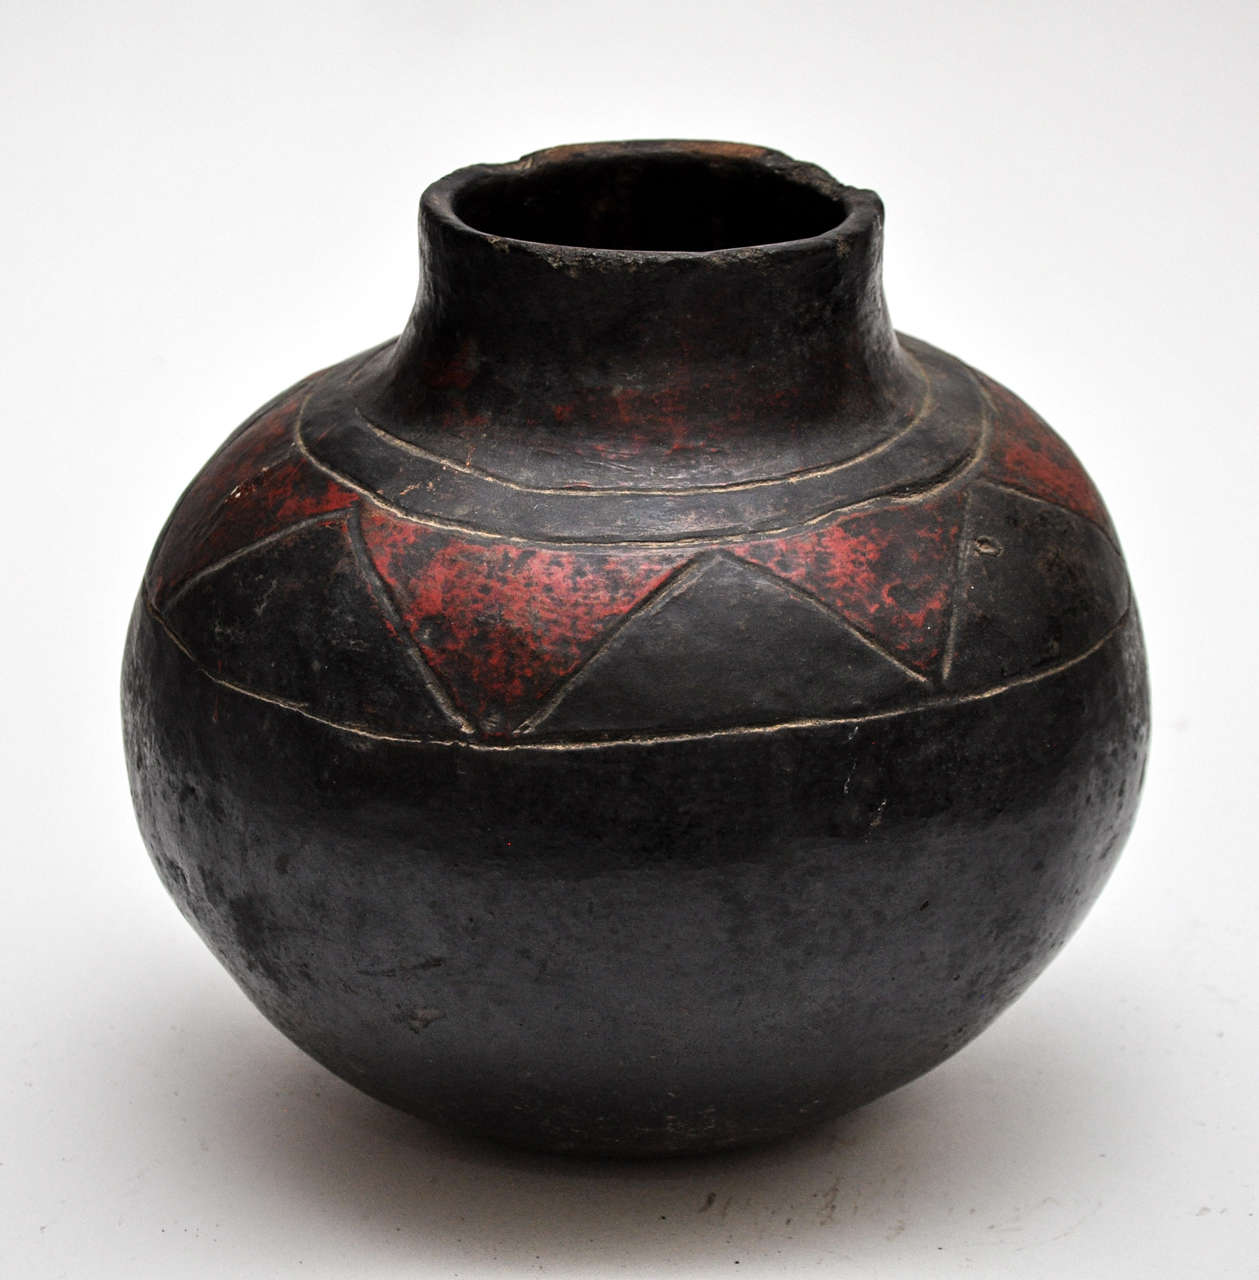 This is a pot made in Southern Africa by the Shona peoples. The pots are typically used to carry beer during spiritual ceremonies. They are crafted from clay, shaped and decorated by hand and small tools, and then fired in a kiln.

Diameter at